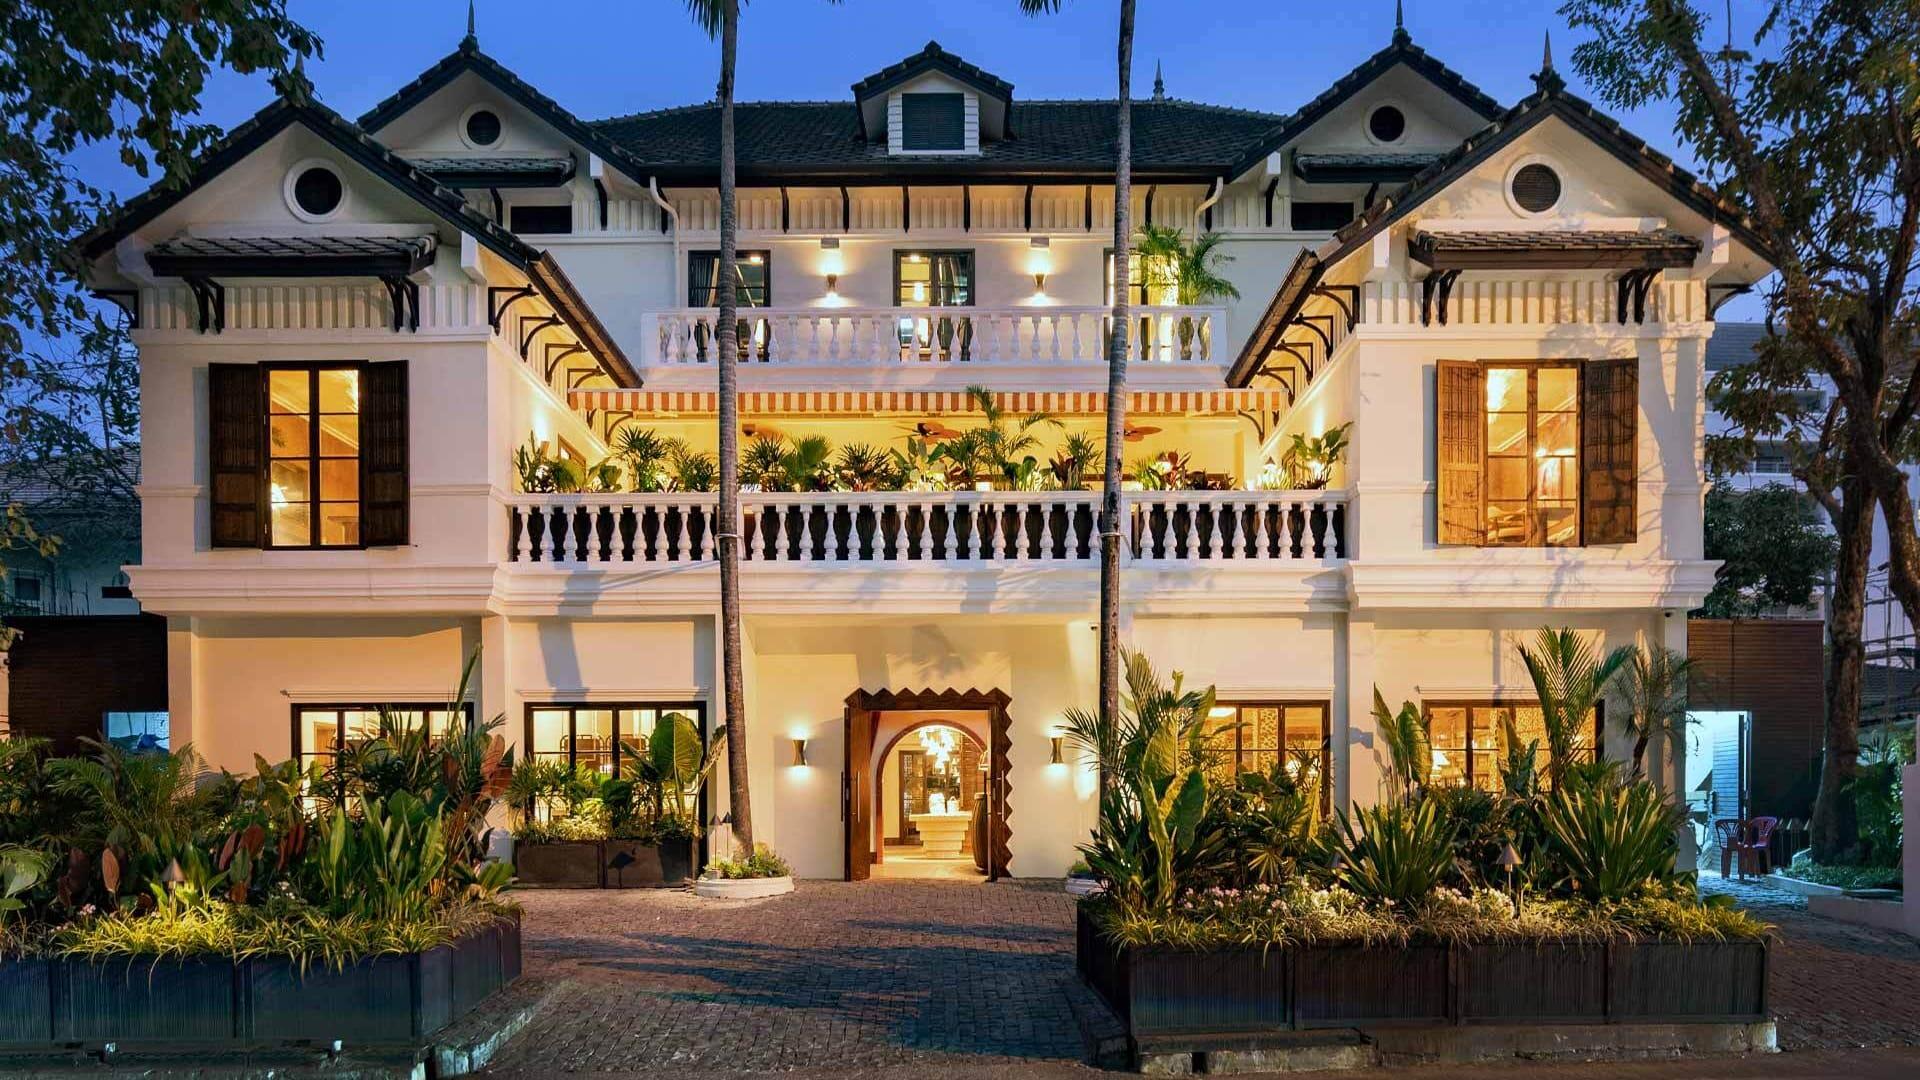 Image of a tropical Soho House home. The image features a long shot of an entirely white building, with wide open wooden windows. There is a yellow light which is visible through the open windows and lots of palm trees and green flowers growing on the balcony and in the front garden.